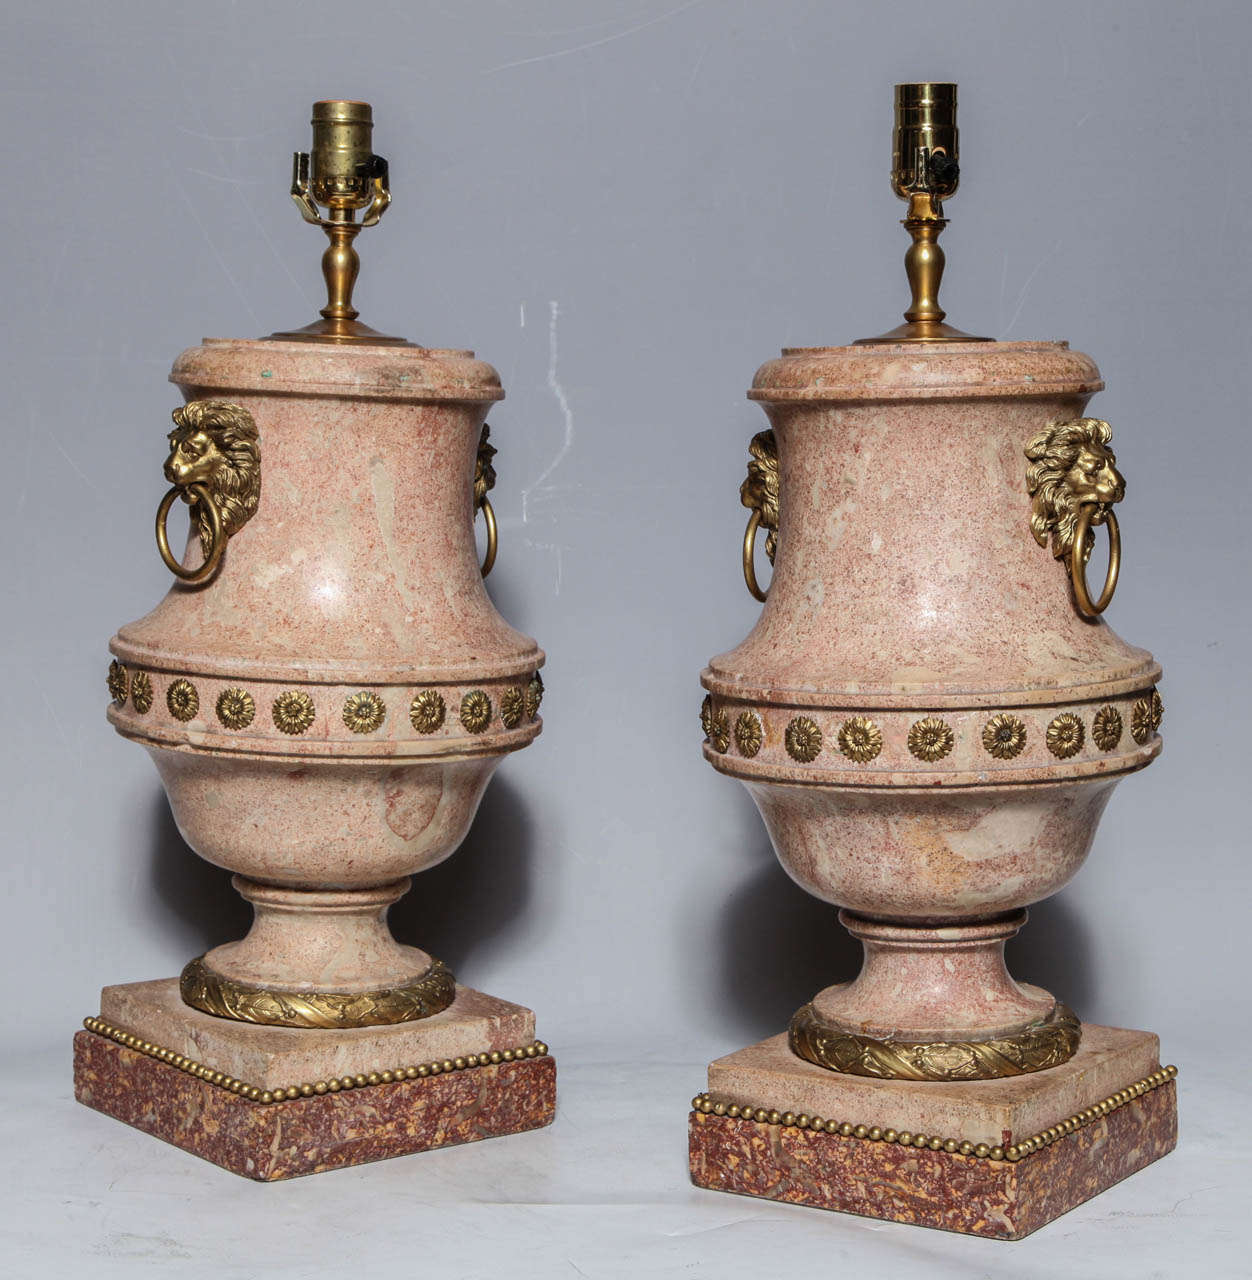 A Pair of Fine Quality Italian Scagliola Urns with Ormolu Mounts and Marble Bases, now wired as lamps. The lion mask bearing ring handles are well sculpted, as are the additional mounts.

Scagliola, is an art form devised as early as the Roman